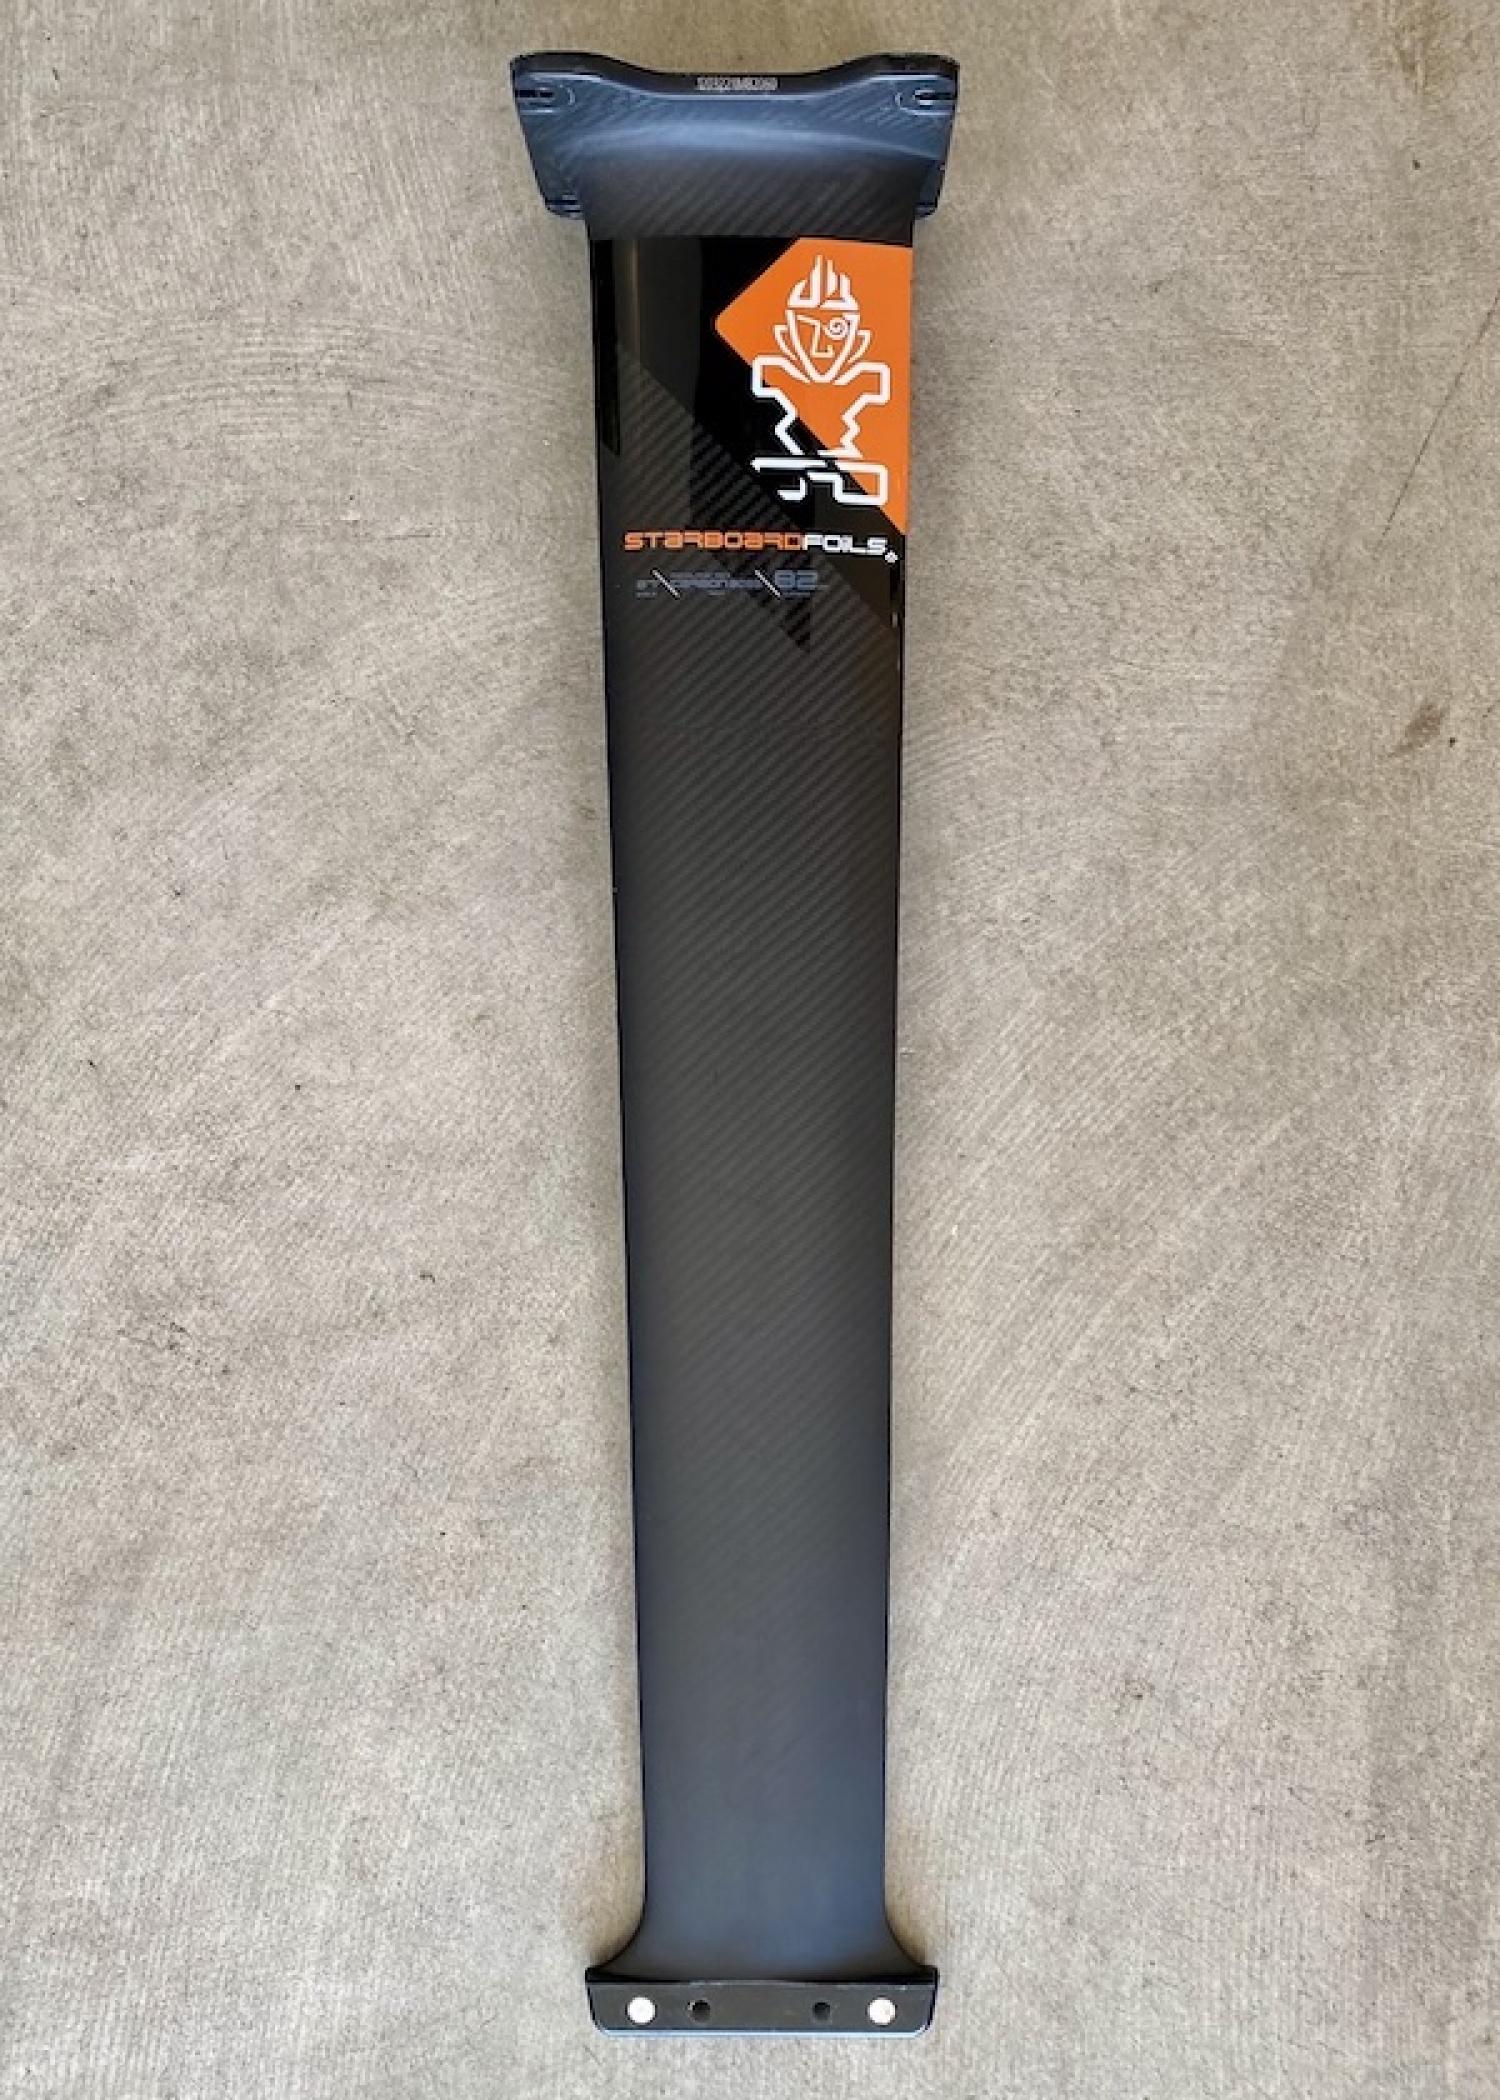 USED (Starboard MAST MONOLITHIC CARBON MK2 82 cm）